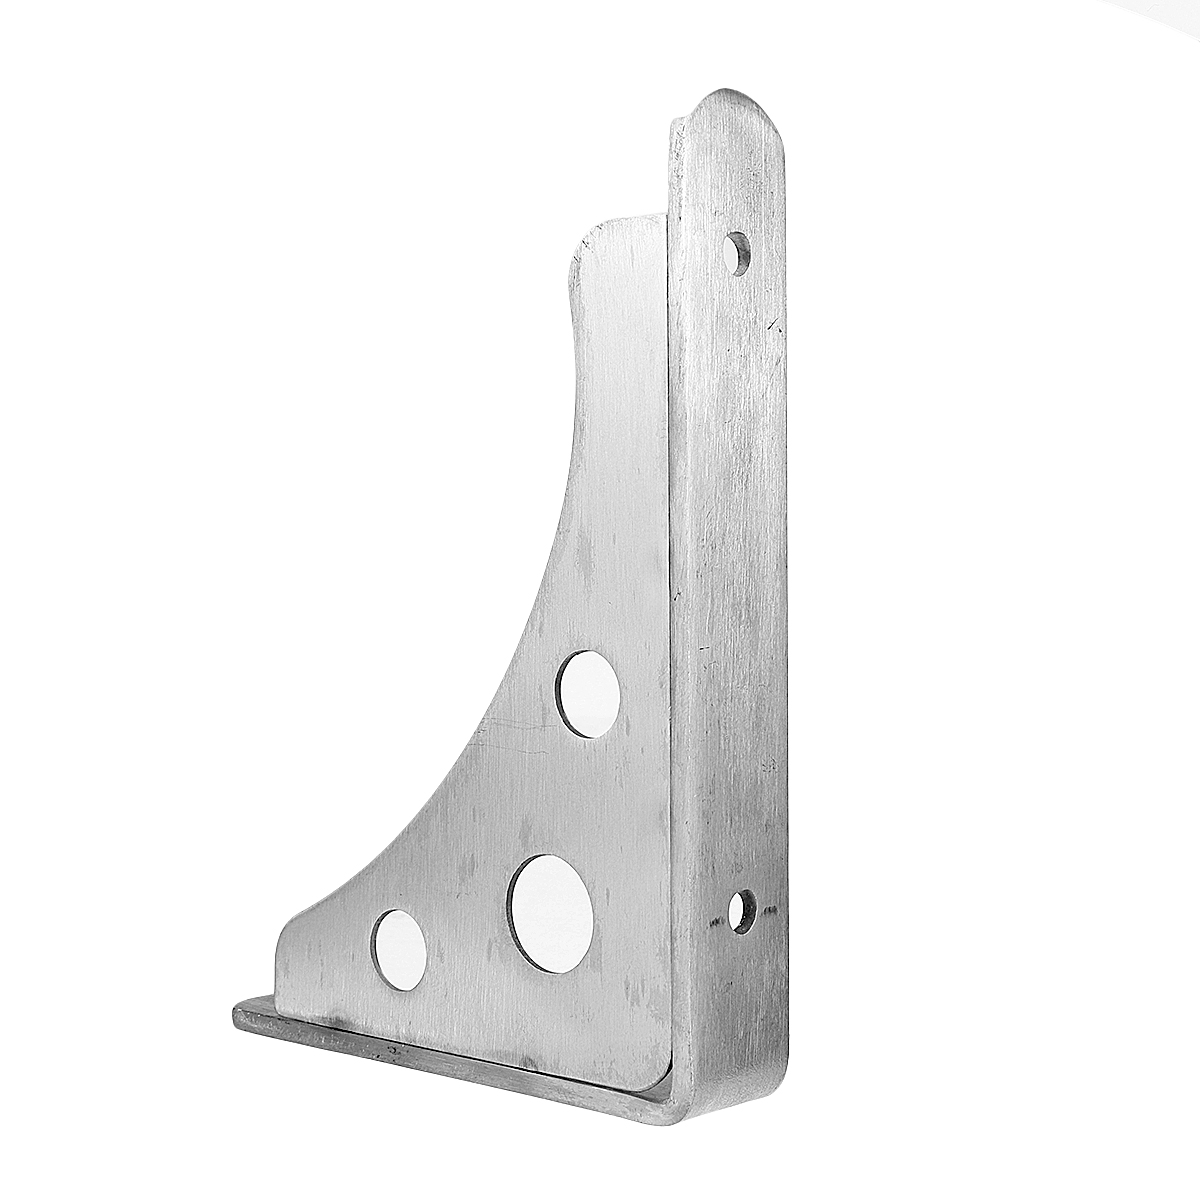 Thick-Stainless-Steel-Bracket-Partition-Load-Bearing-Bracket-Side-Left-And-Right-Tripod-Shelf-Rack-1639406-3